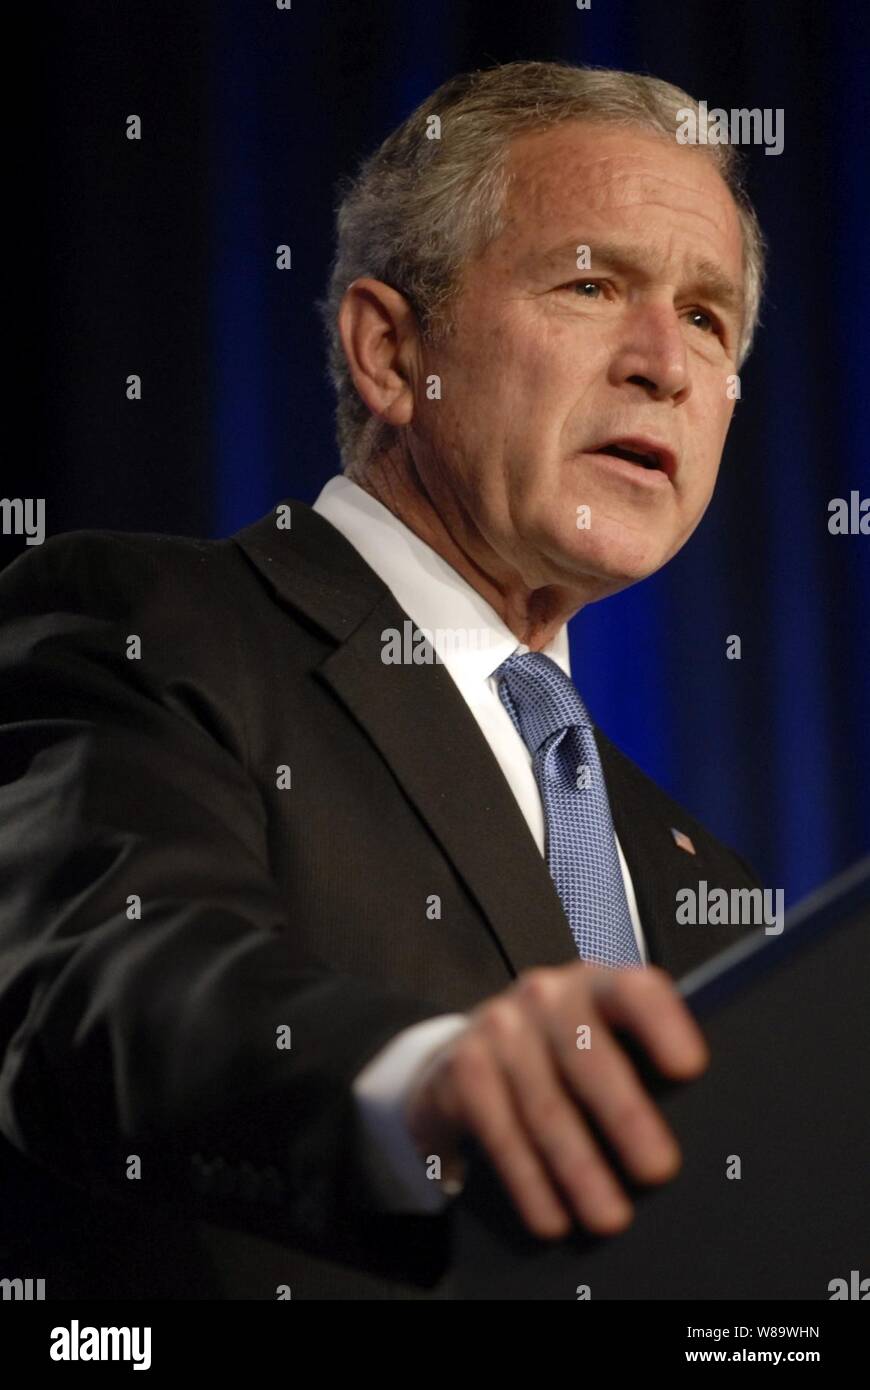 President George W. Bush speaks to the audience in the Pentagon auditorium on March 19, 2008.  Bush addressed members of the Armed Forces, Department of Defense and Department of State employees about the progress made in Iraq and the Global War on Terror. Stock Photo